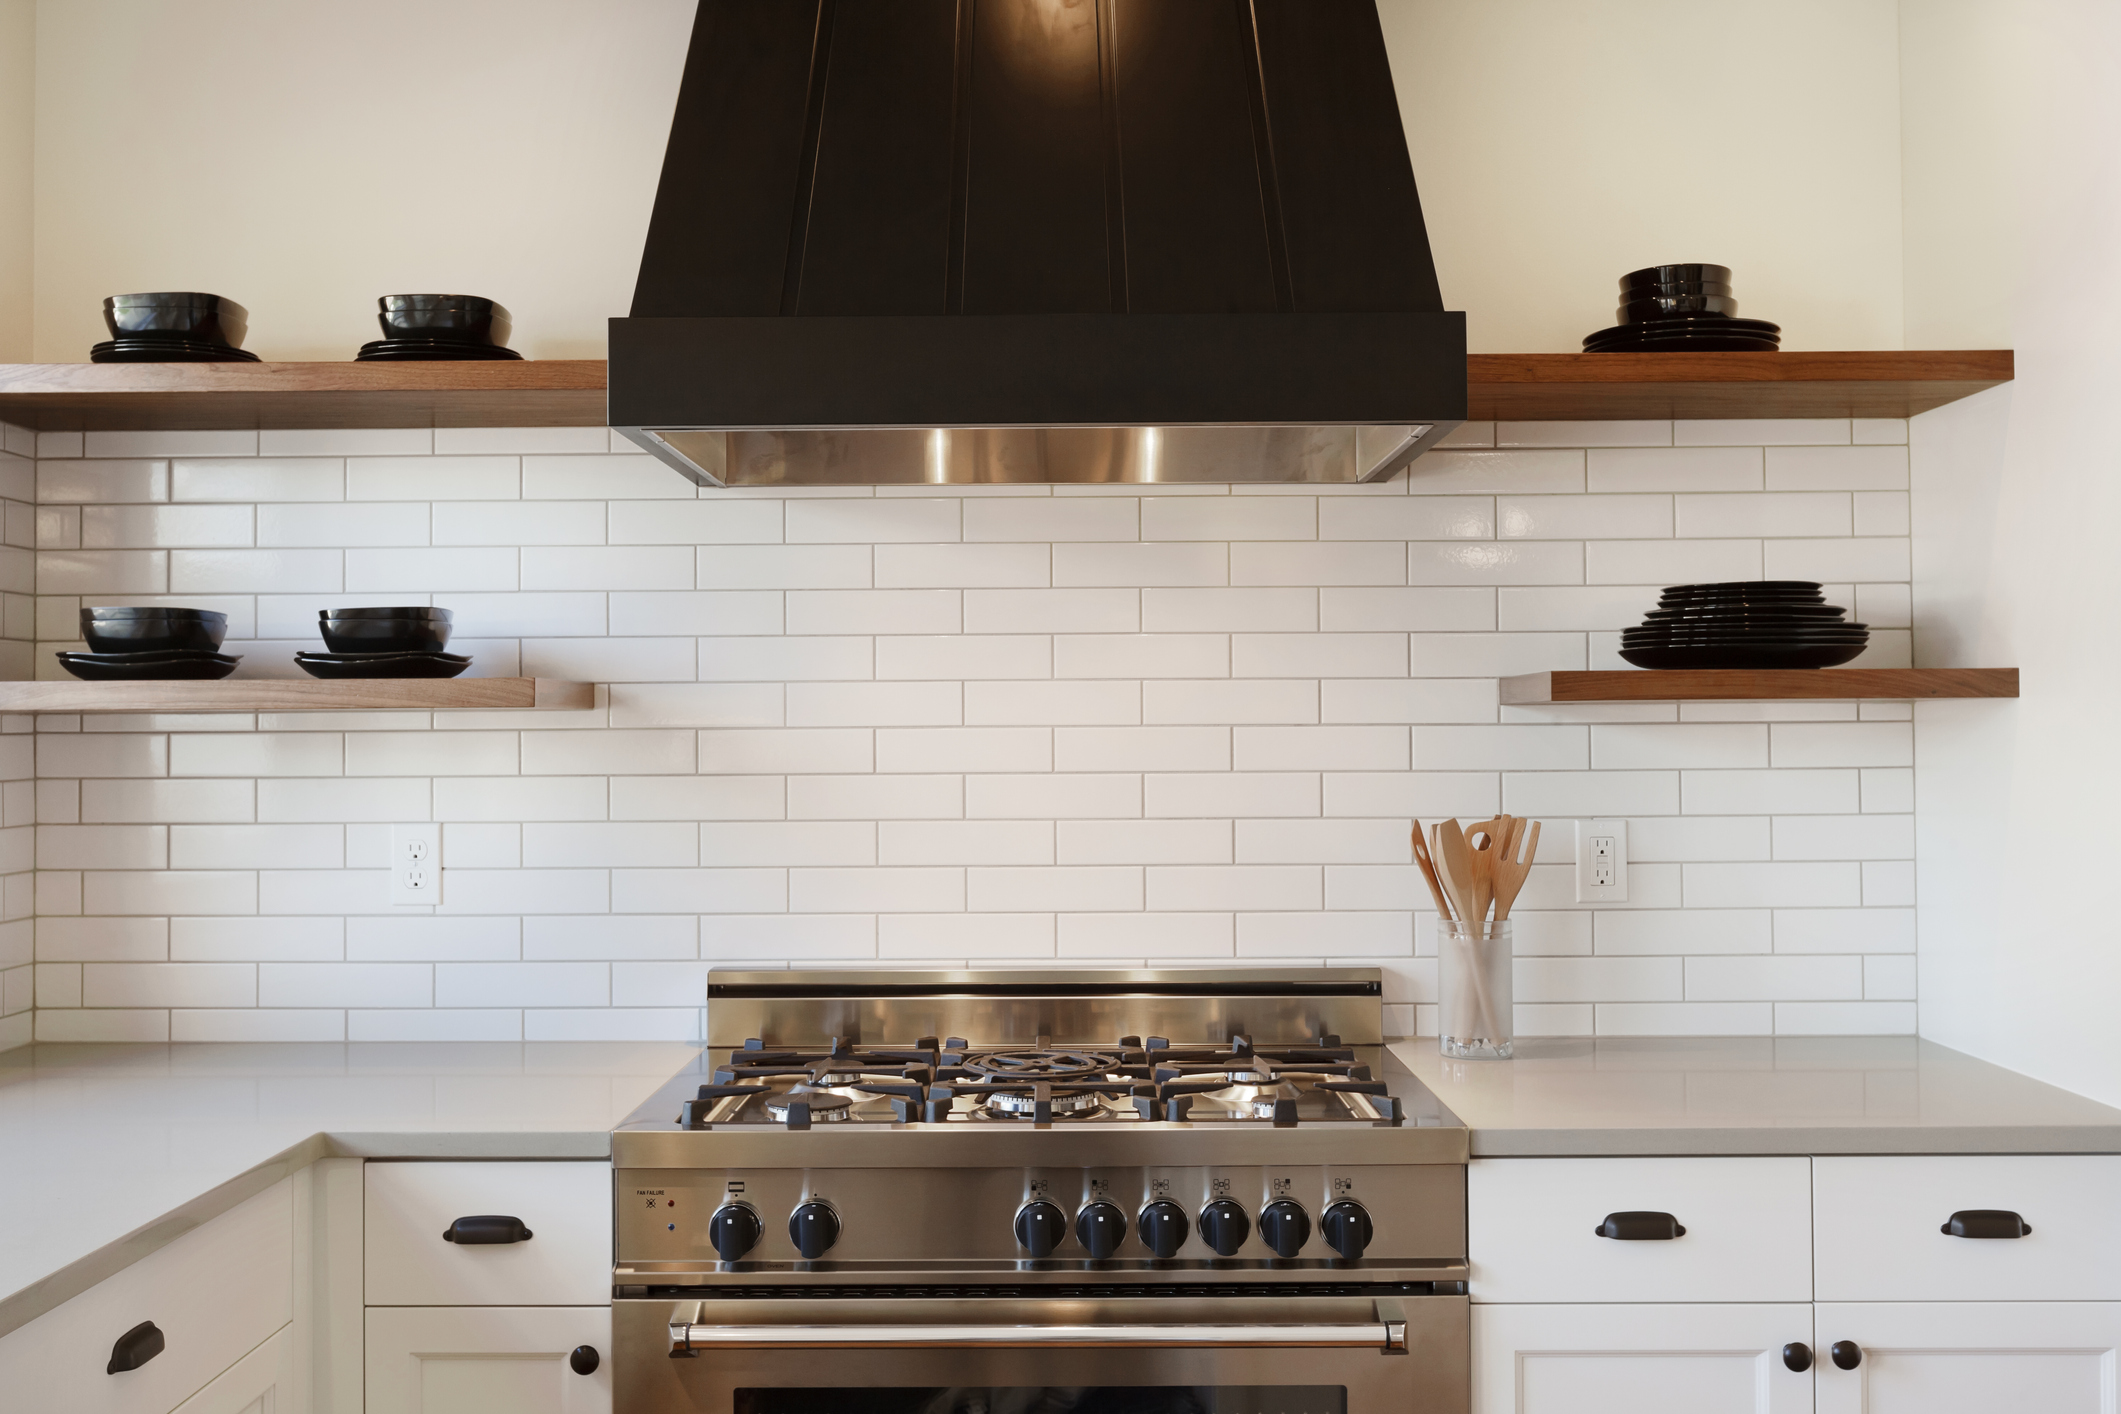 What Is a Kitchen Range: Types of Ranges